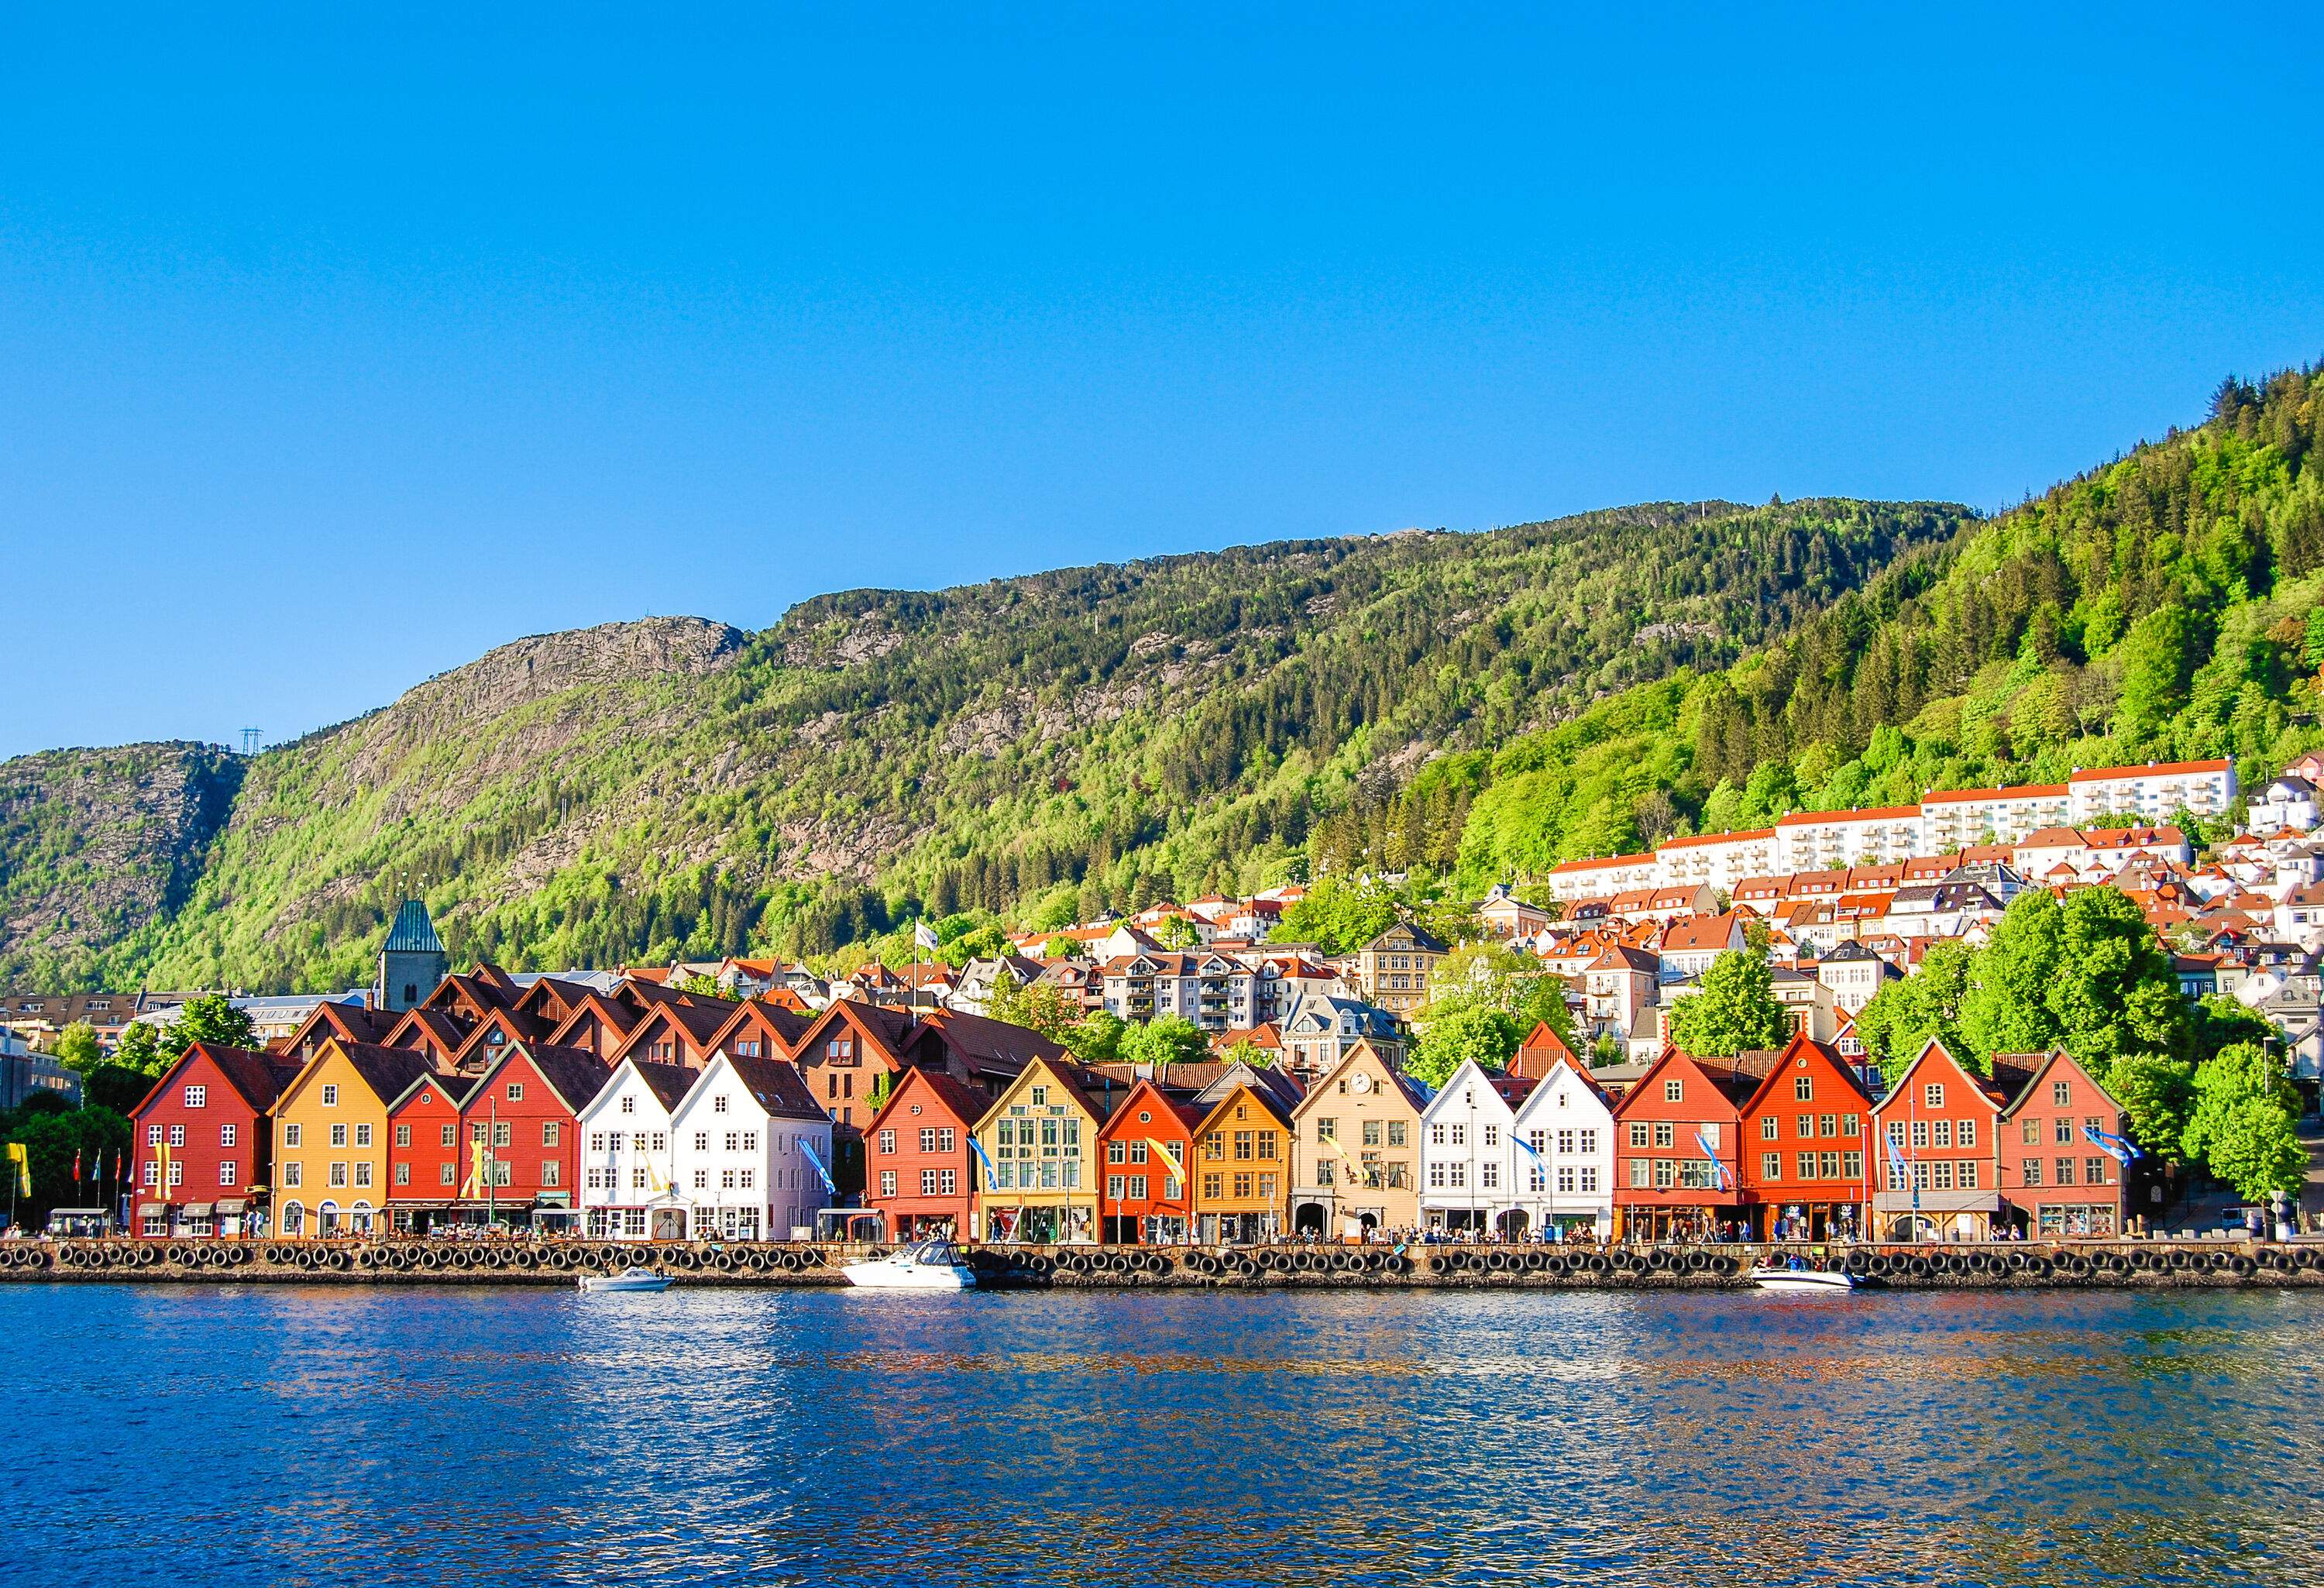 Colourful houses lined per row, sloping on the shore at the side of lush mountains.